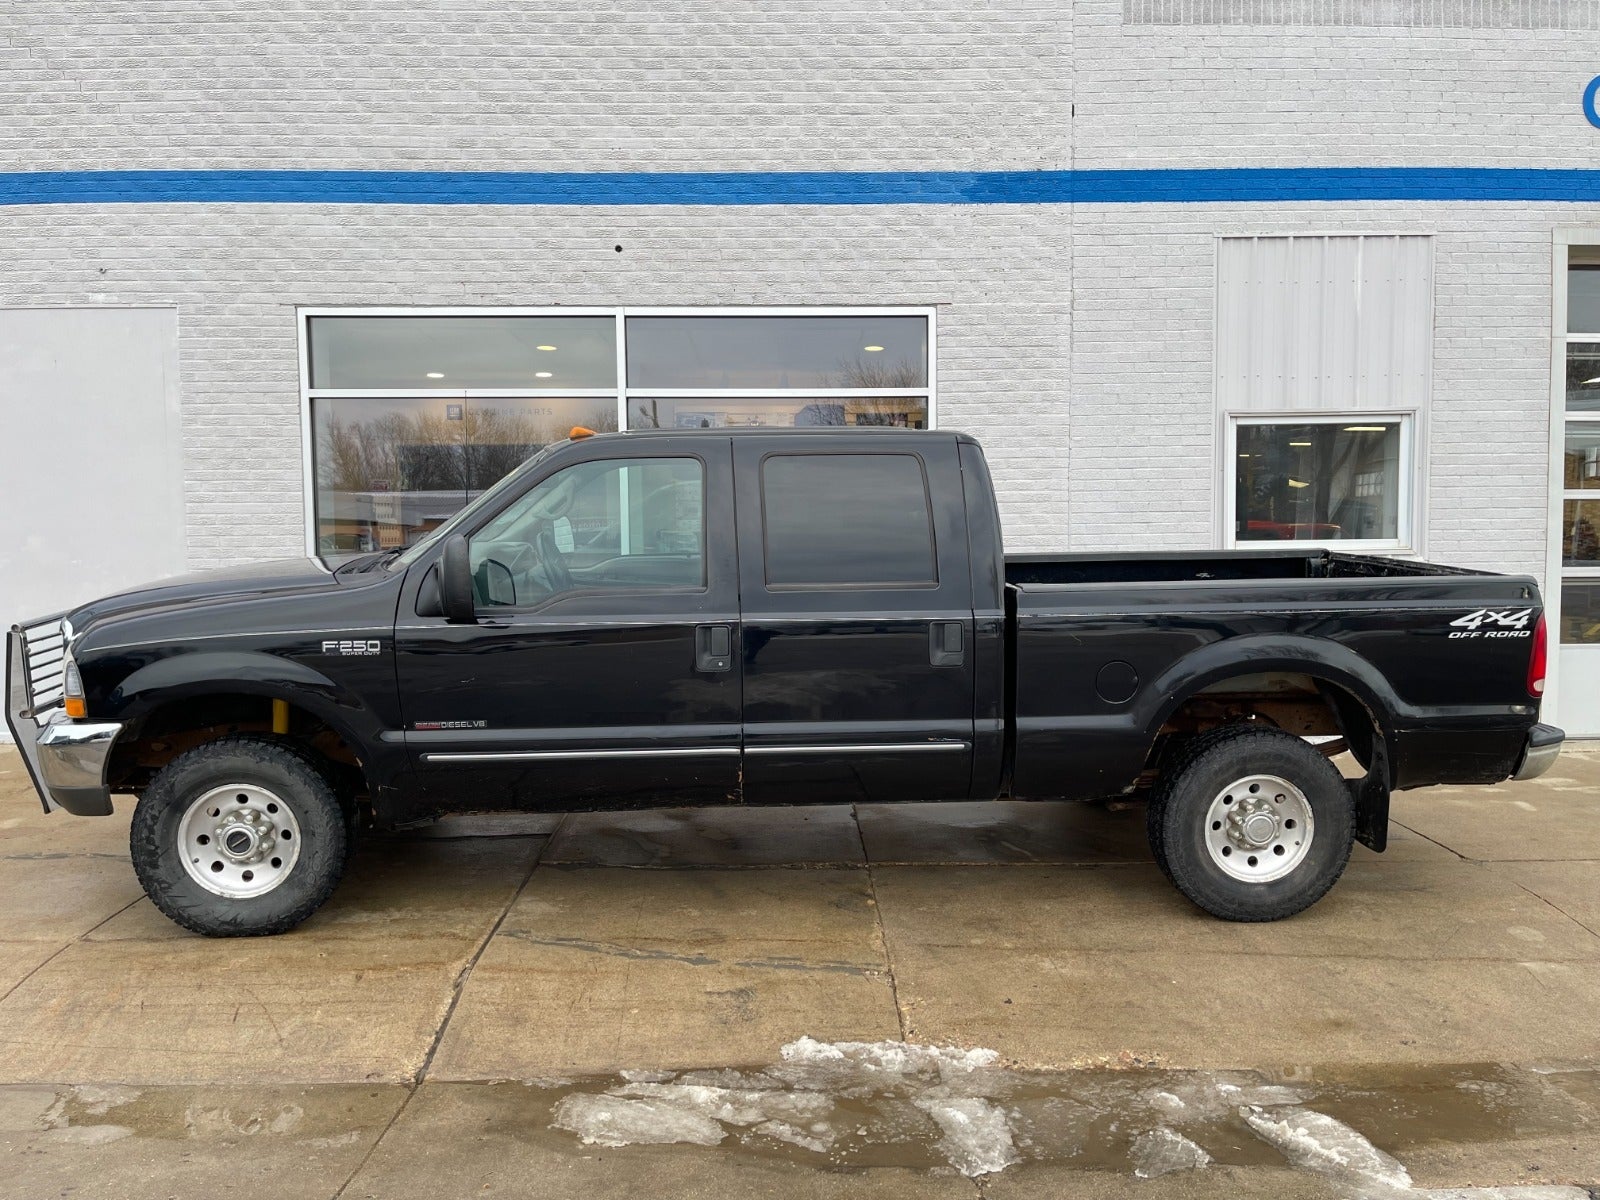 Used 2000 Ford F-250 Super Duty XLT with VIN 1FTNW21F4YEA18213 for sale in Edgerton, Minnesota